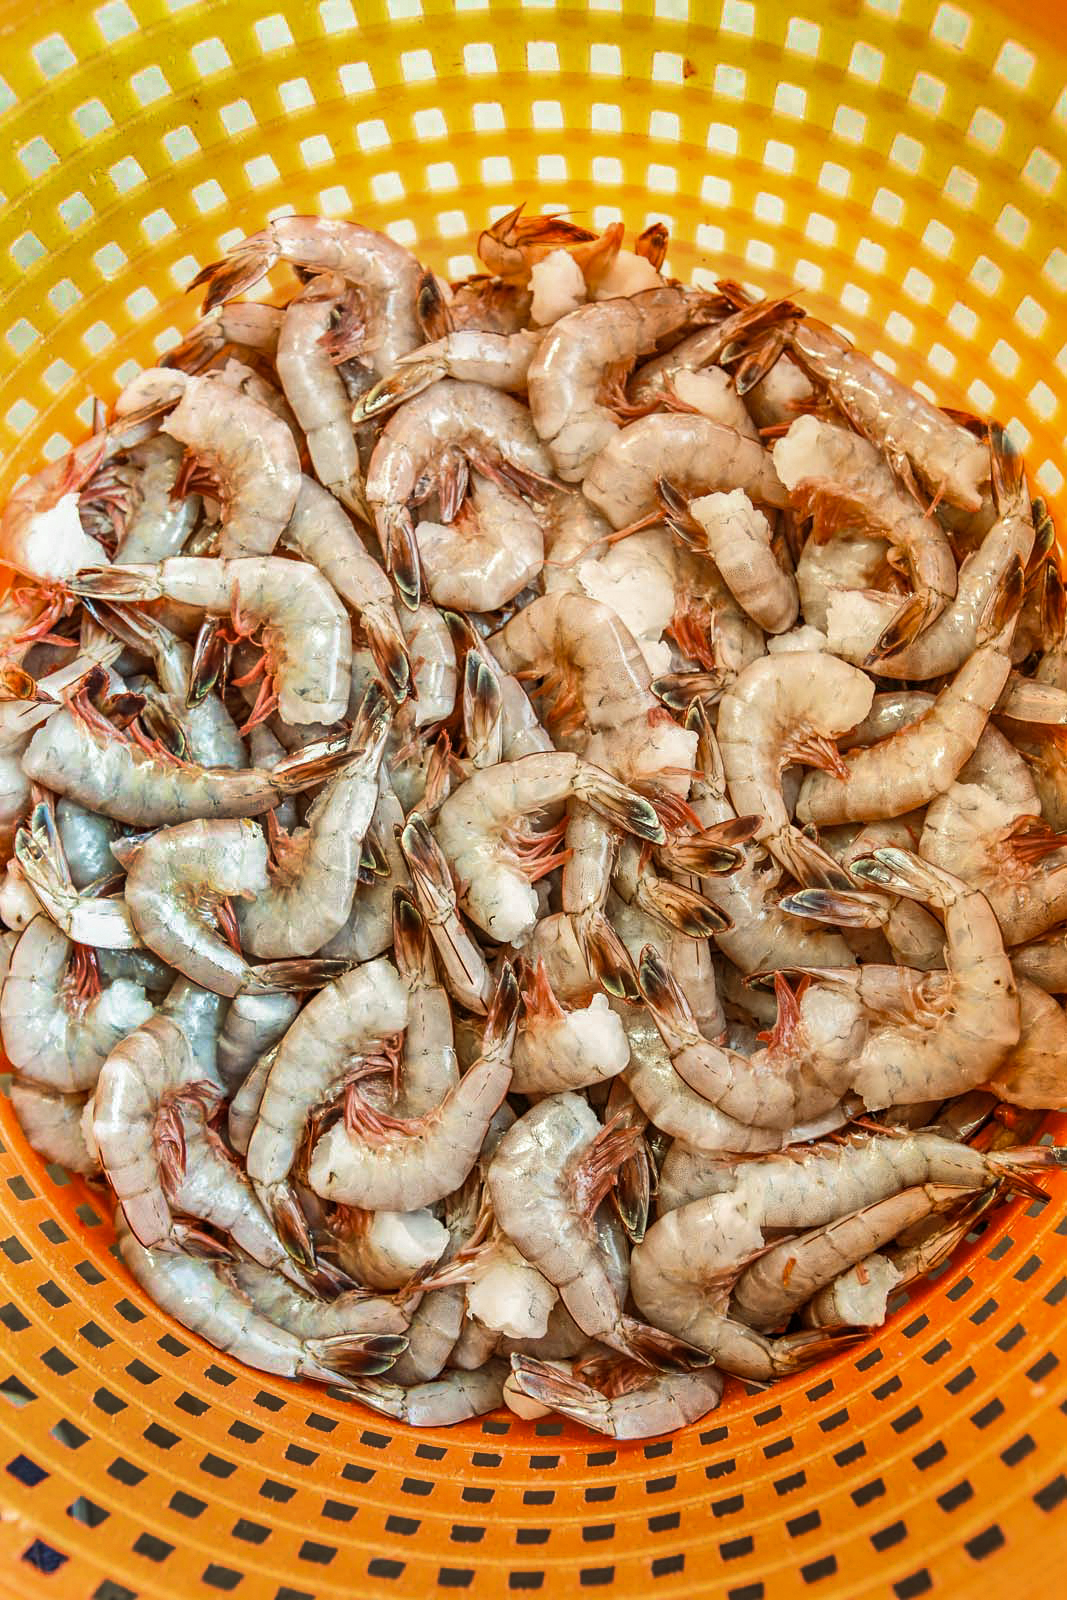 Jeff Dowdy, also known as The Shrimp Guy, sells fish and shellfish from his truck by pre-order and as available, delivering to locations around South Carolina. Look for him in Columbia in a parking area near the Hangar at Owens Field, Irmo, and Blythewood. 